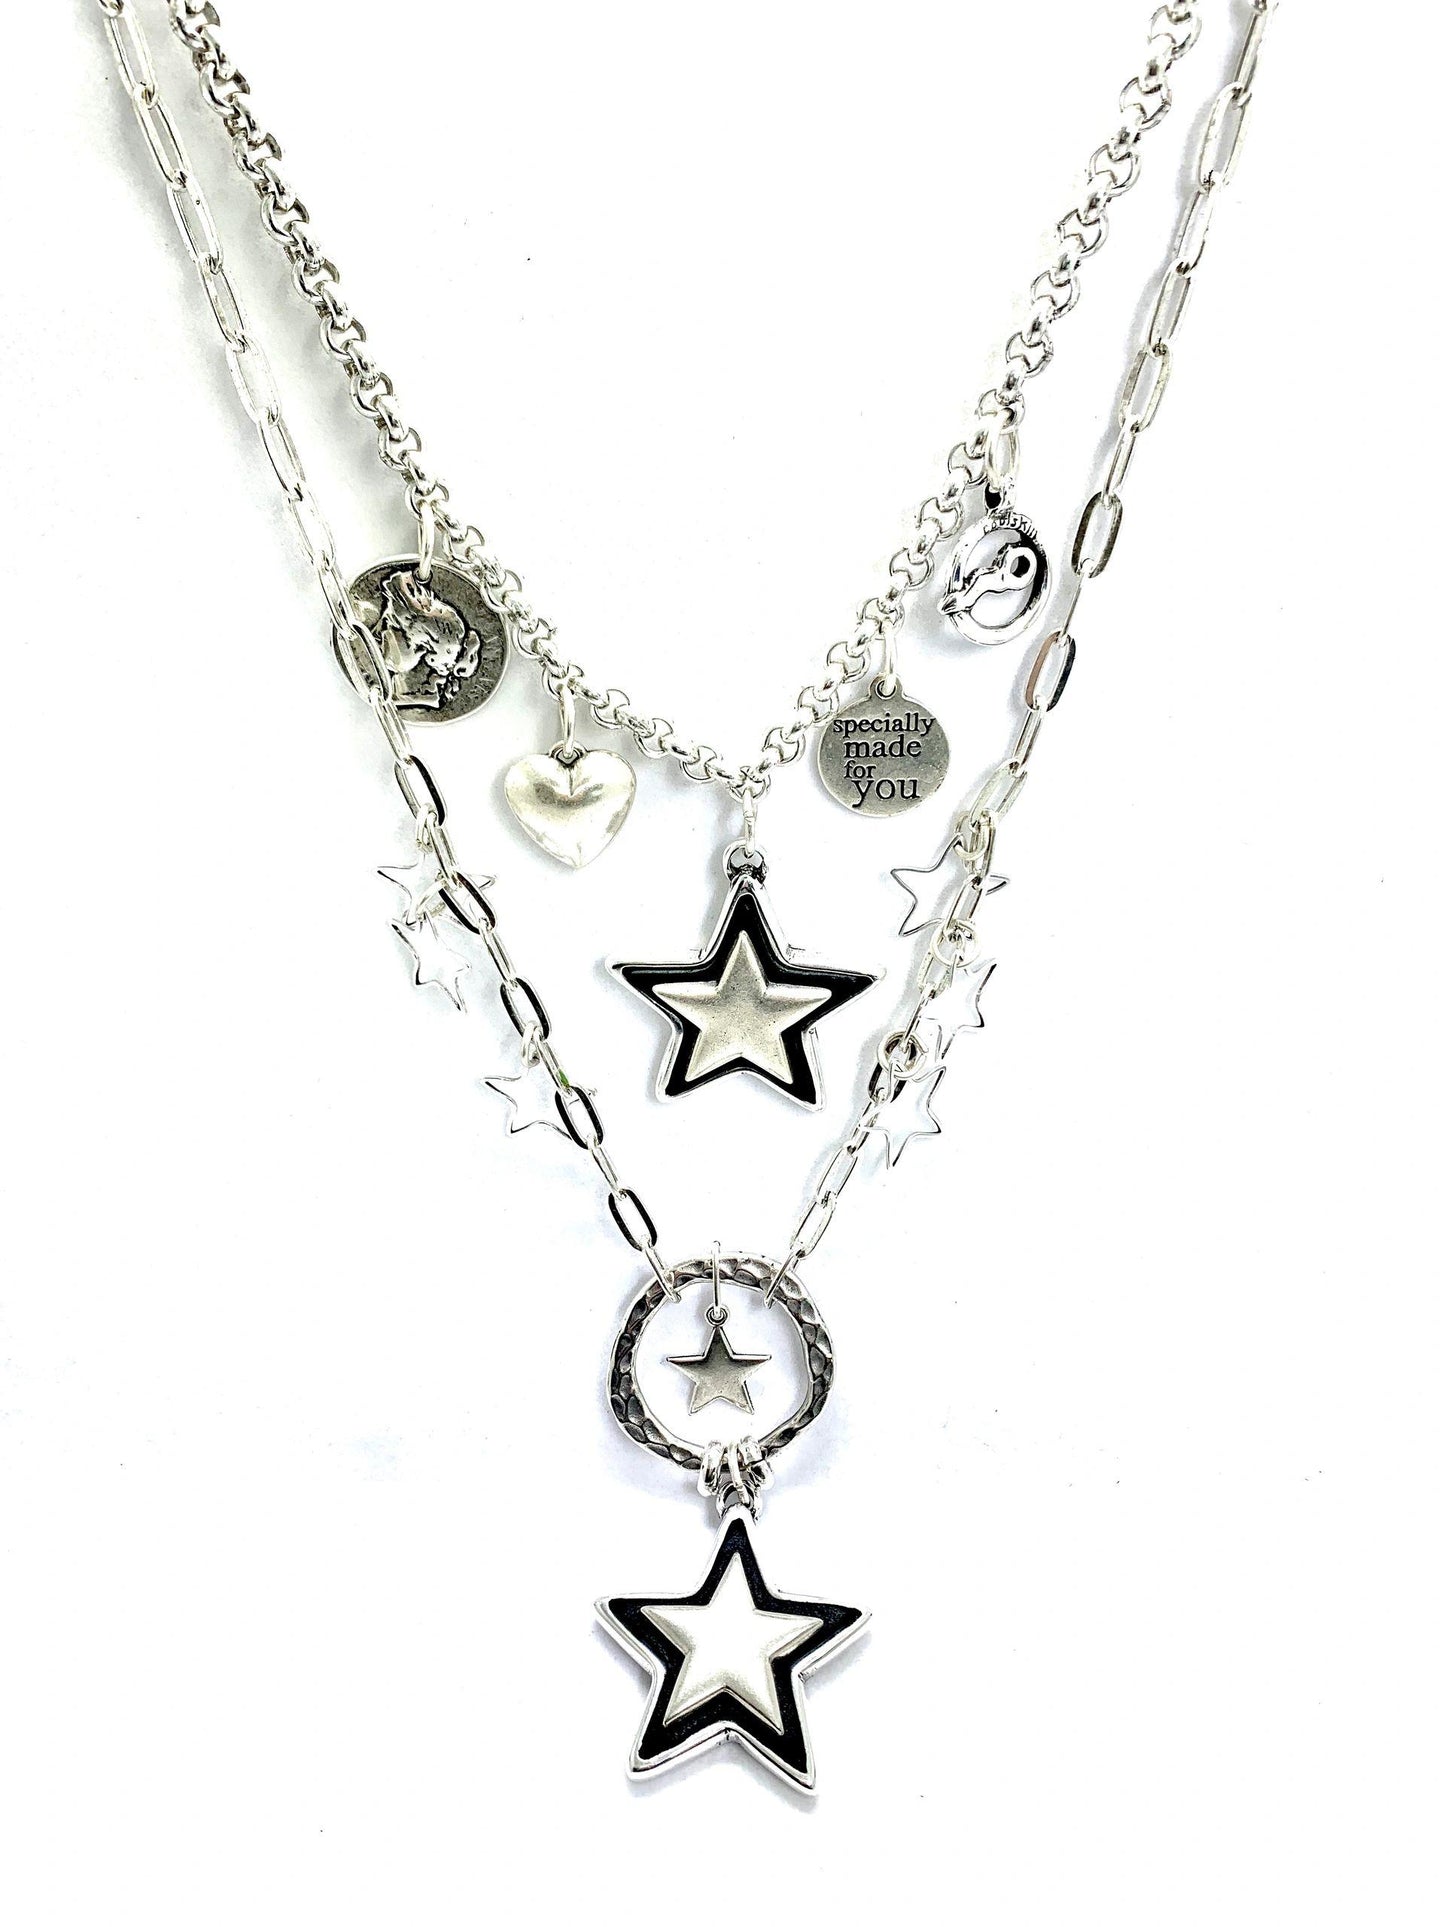 Coolskin Stars, Coins and Love Necklace